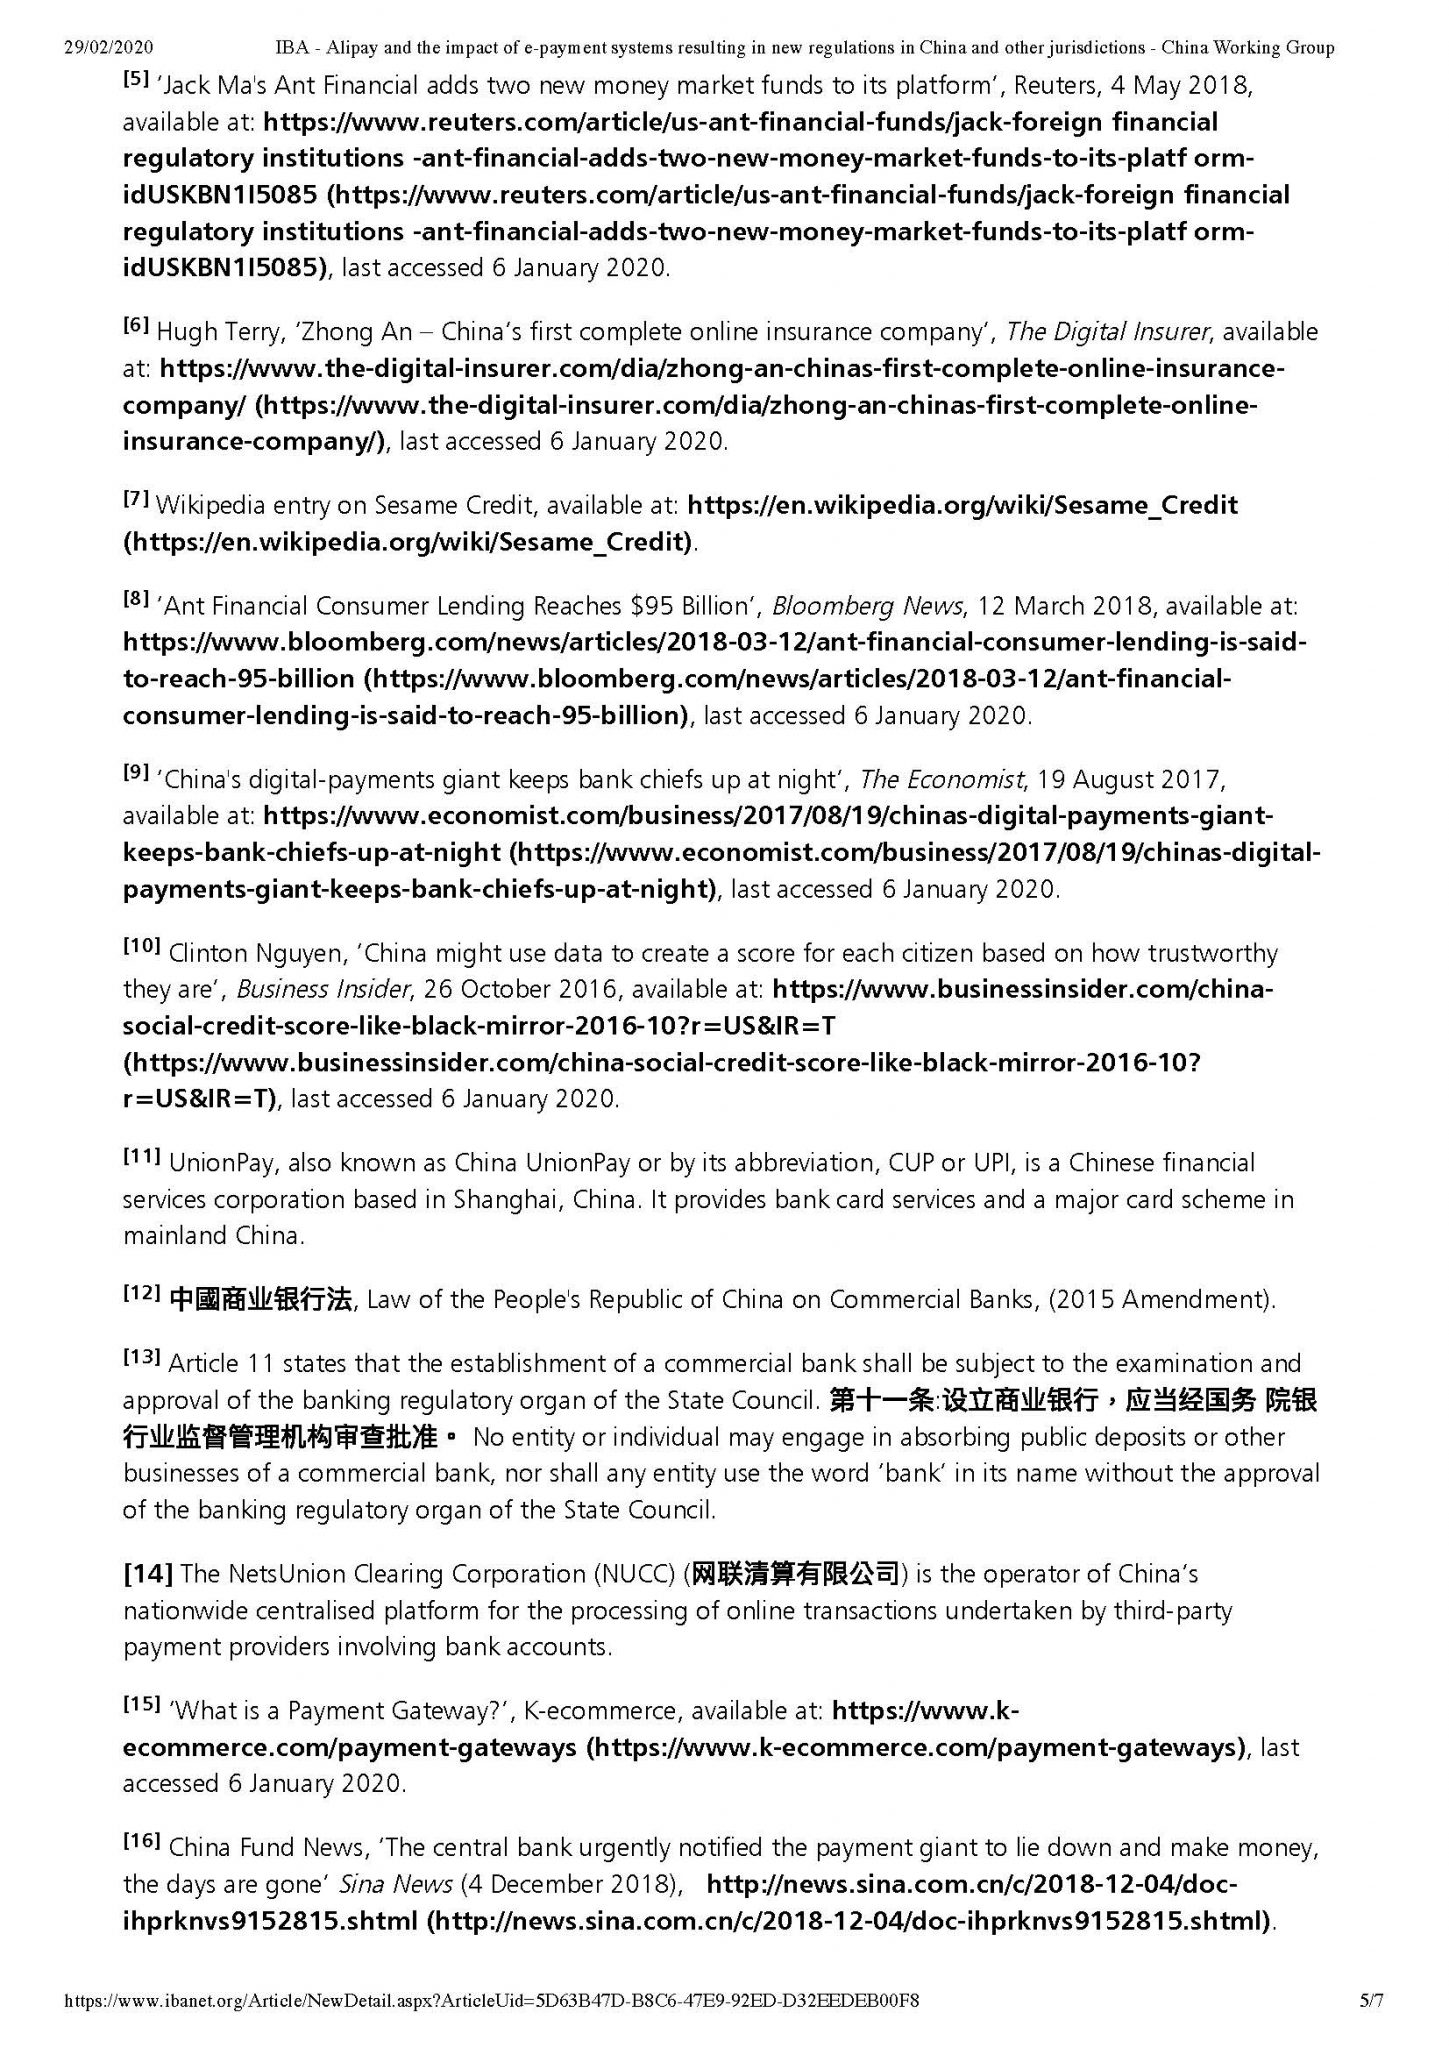 Writing Sample (IBA article) - Alipay and the impact of e-payment systems resulting in new regulations in China and other jurisdictions - China Working Group_頁面_5